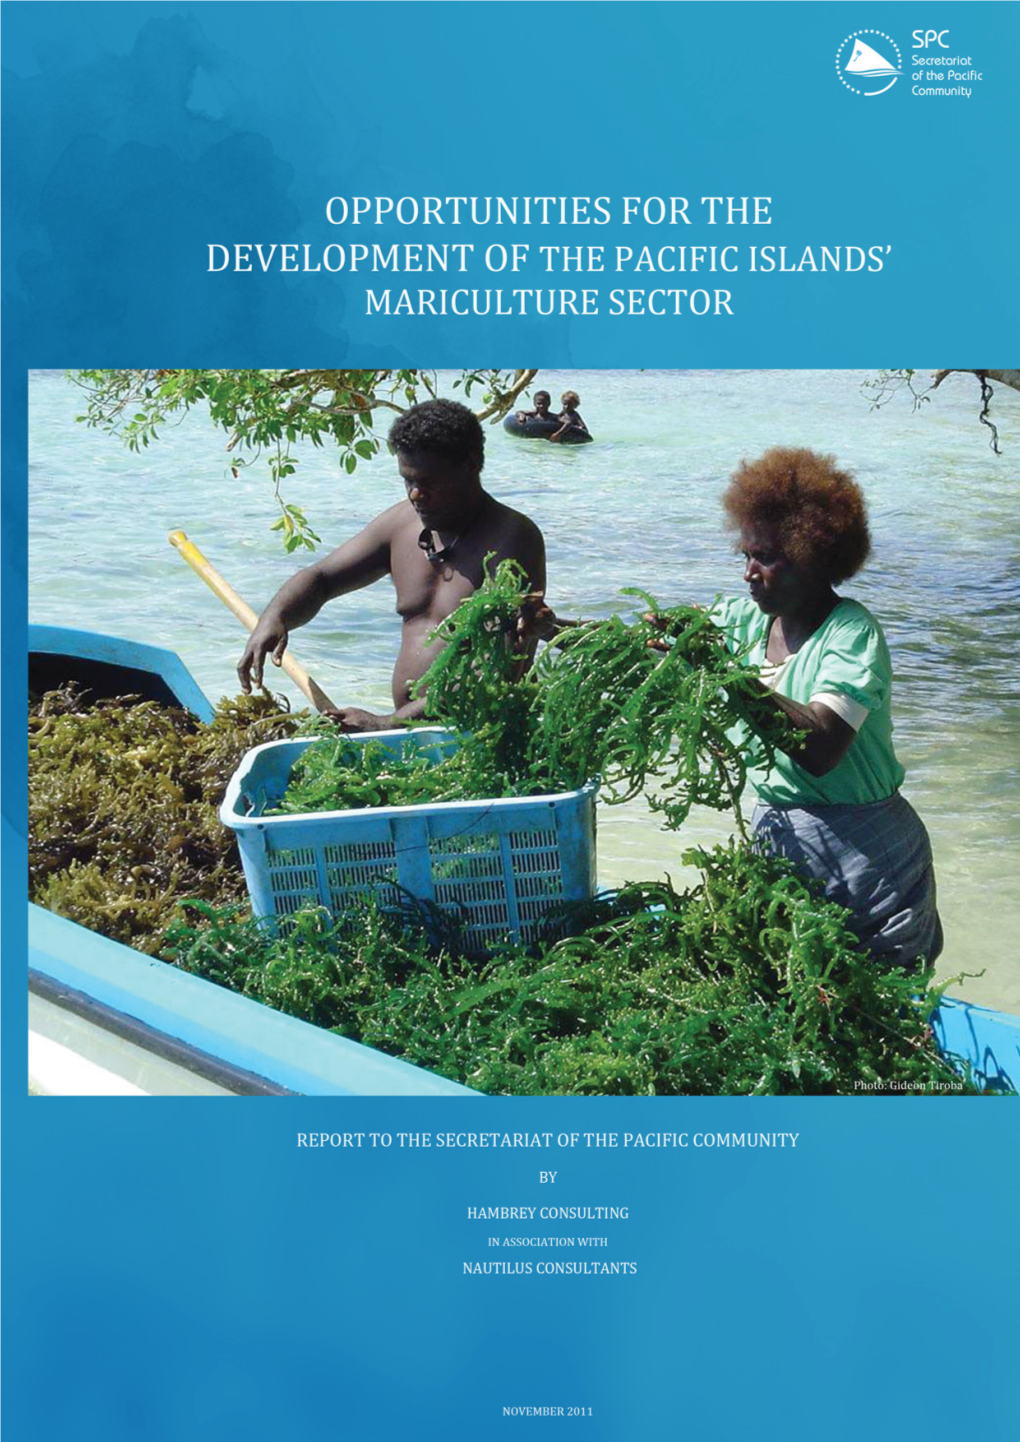 Opportunities for the Development of the Pacific Islands' Mariculture Sector